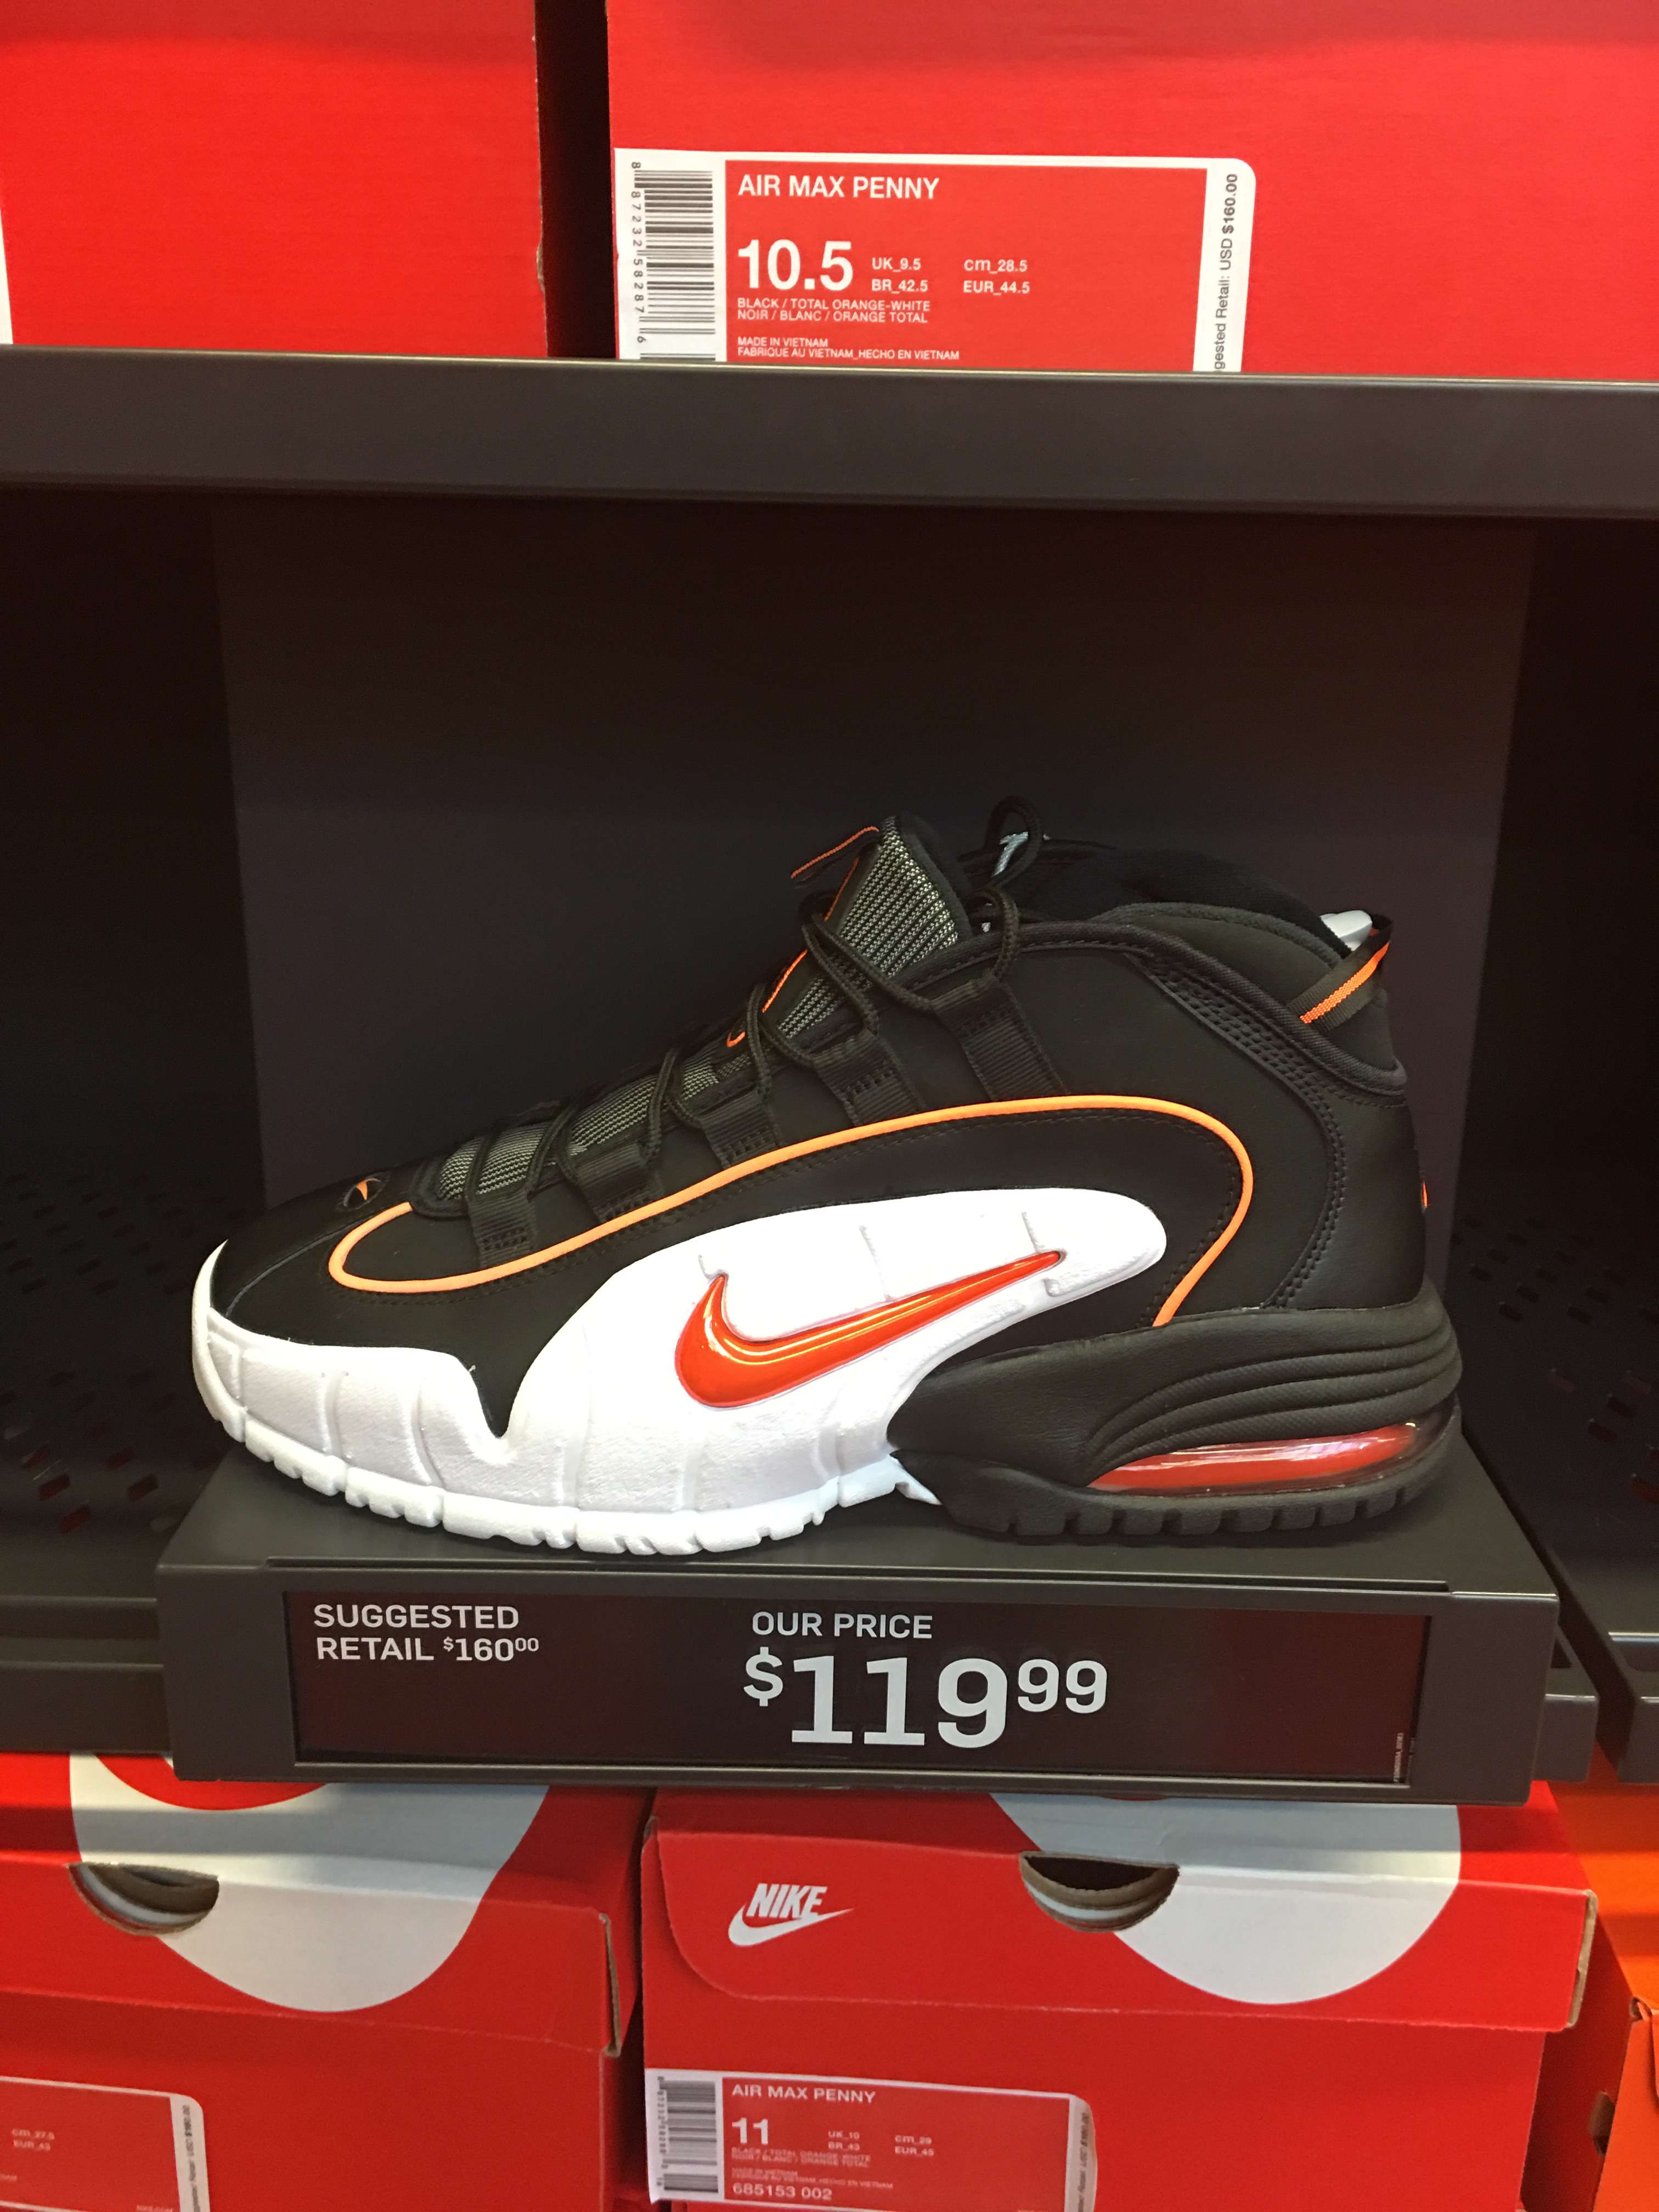 OFFICIAL JANUARY 2019 NIKE OUTLET/WEBSITE/STORE UPDATE THREAD | Page 7 | NikeTalk